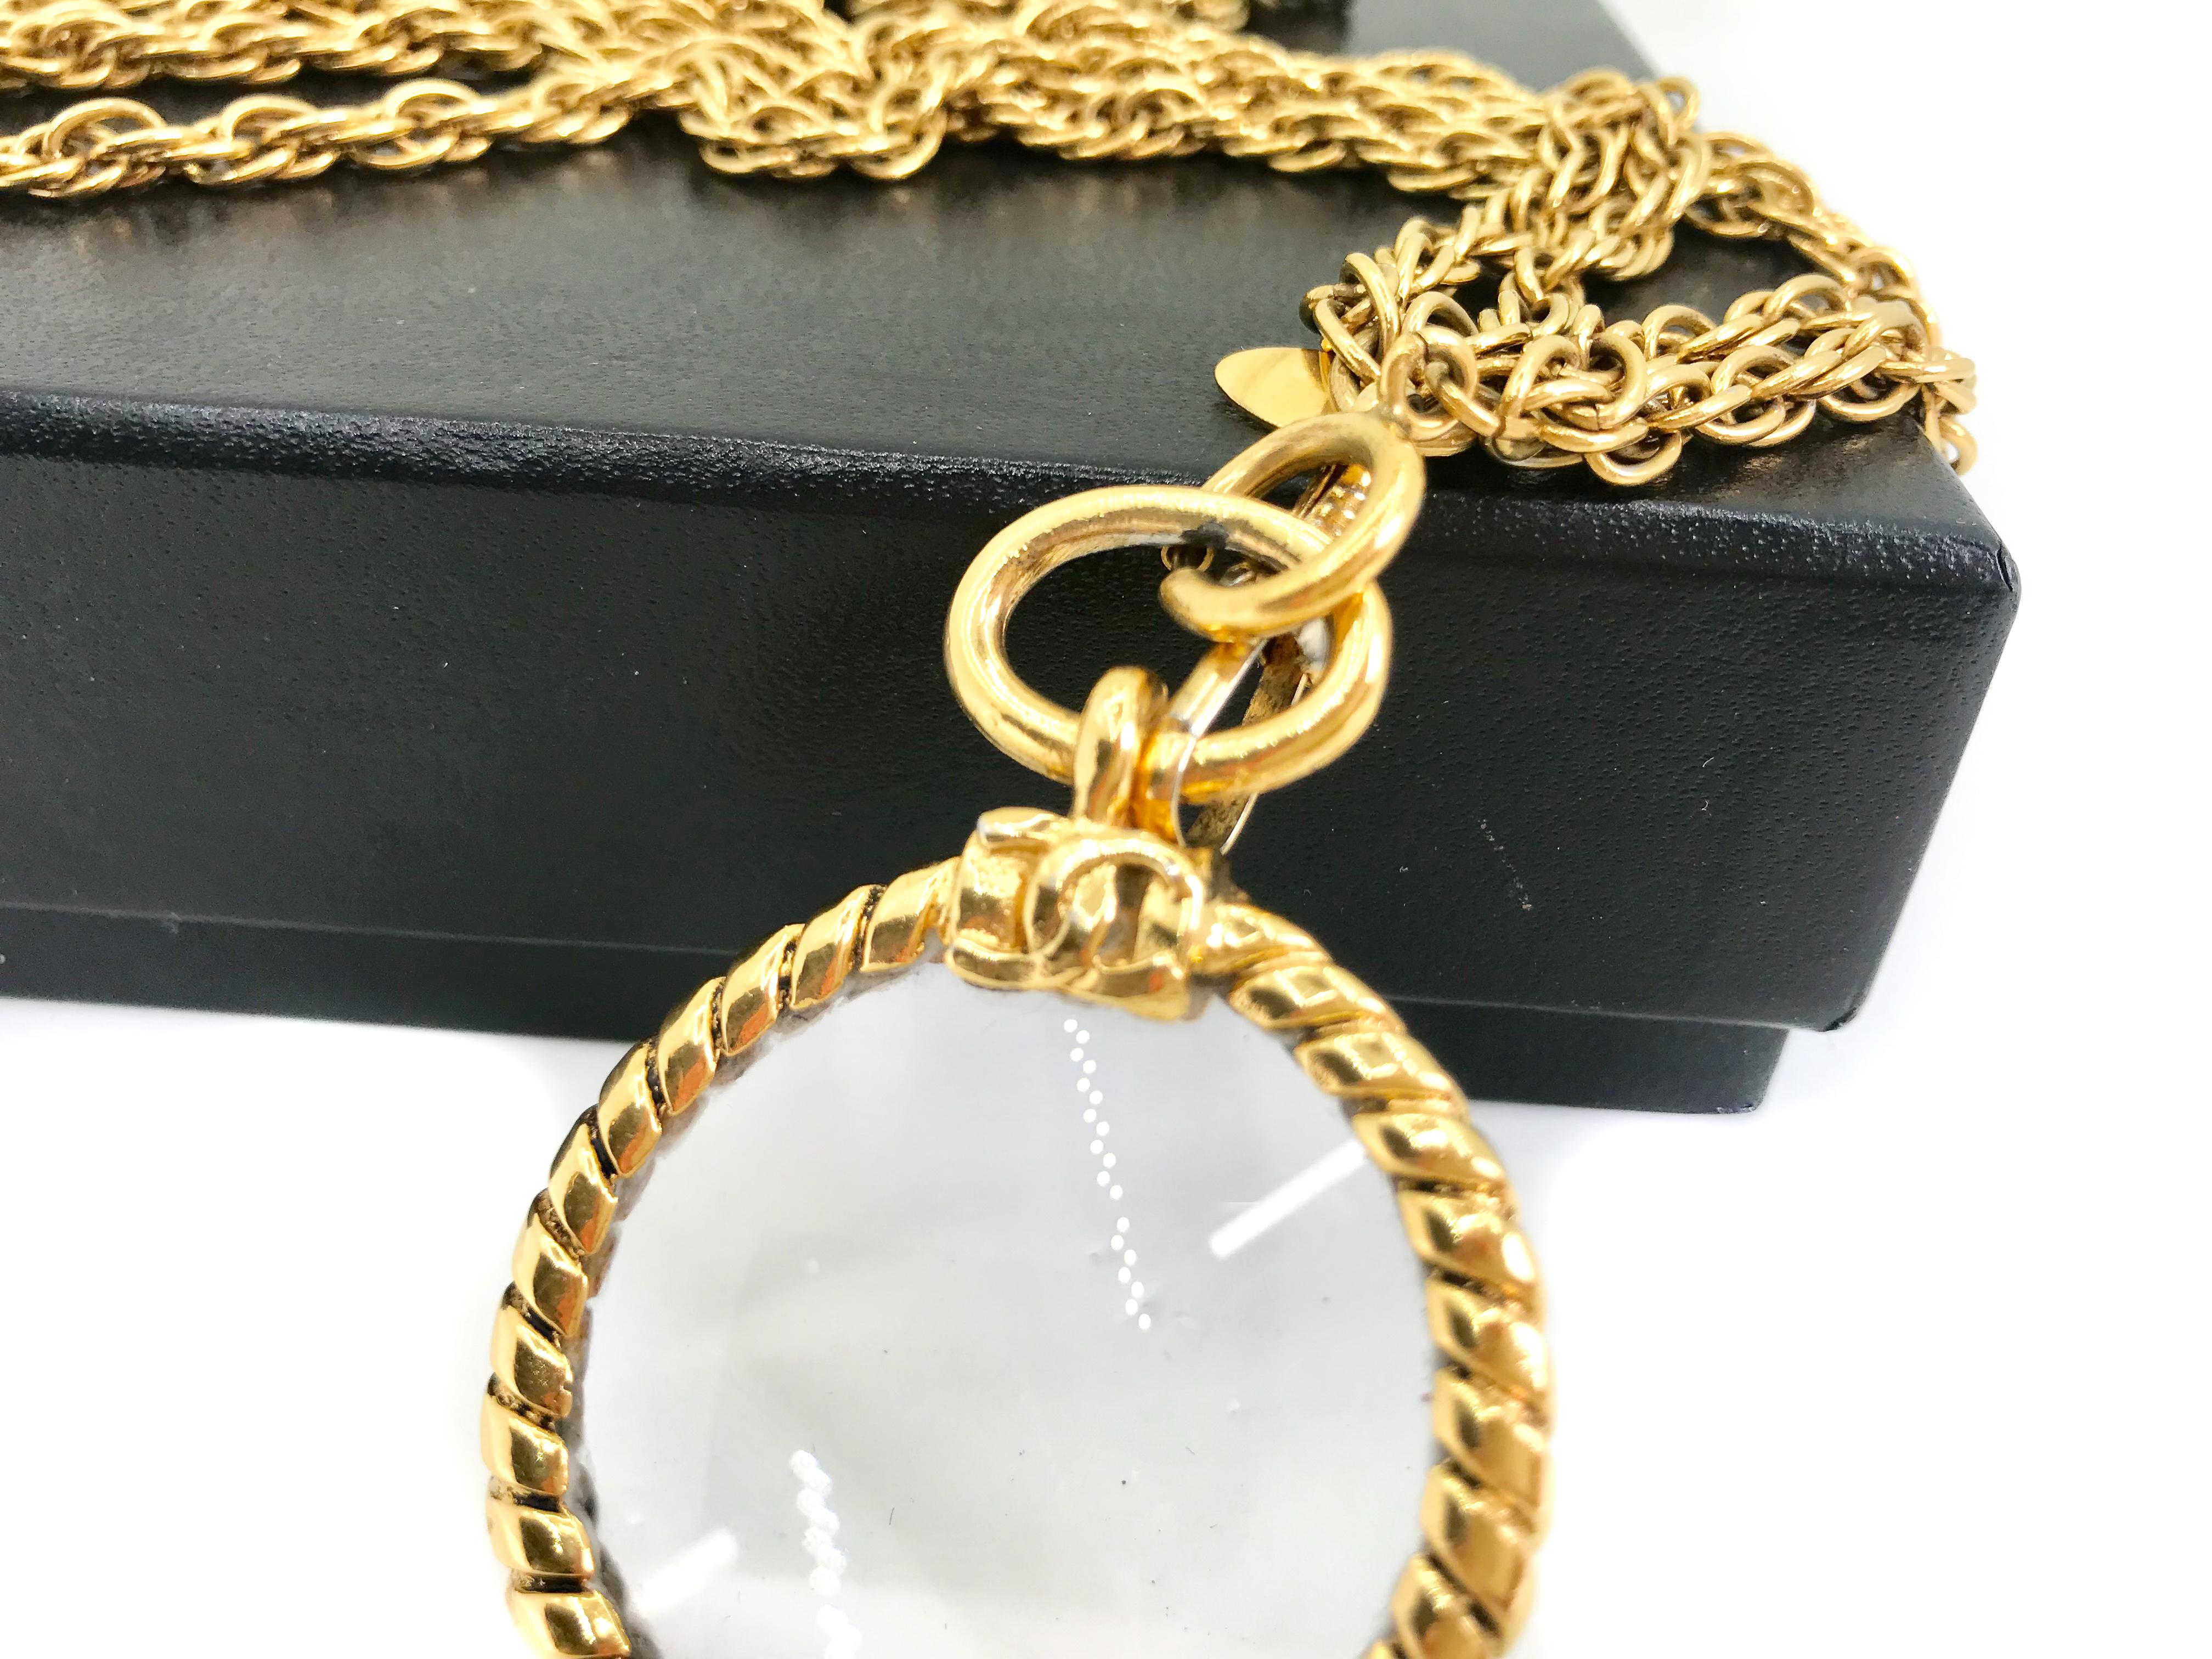 Chanel 1980s vintage long magnifying glass loupe gold plated pendant necklace

 CC logo featured and a double 24 carat gold-plated chain. 

Excellent condition with some very minor imperfections which are to be expected from a vintage piece. Minor